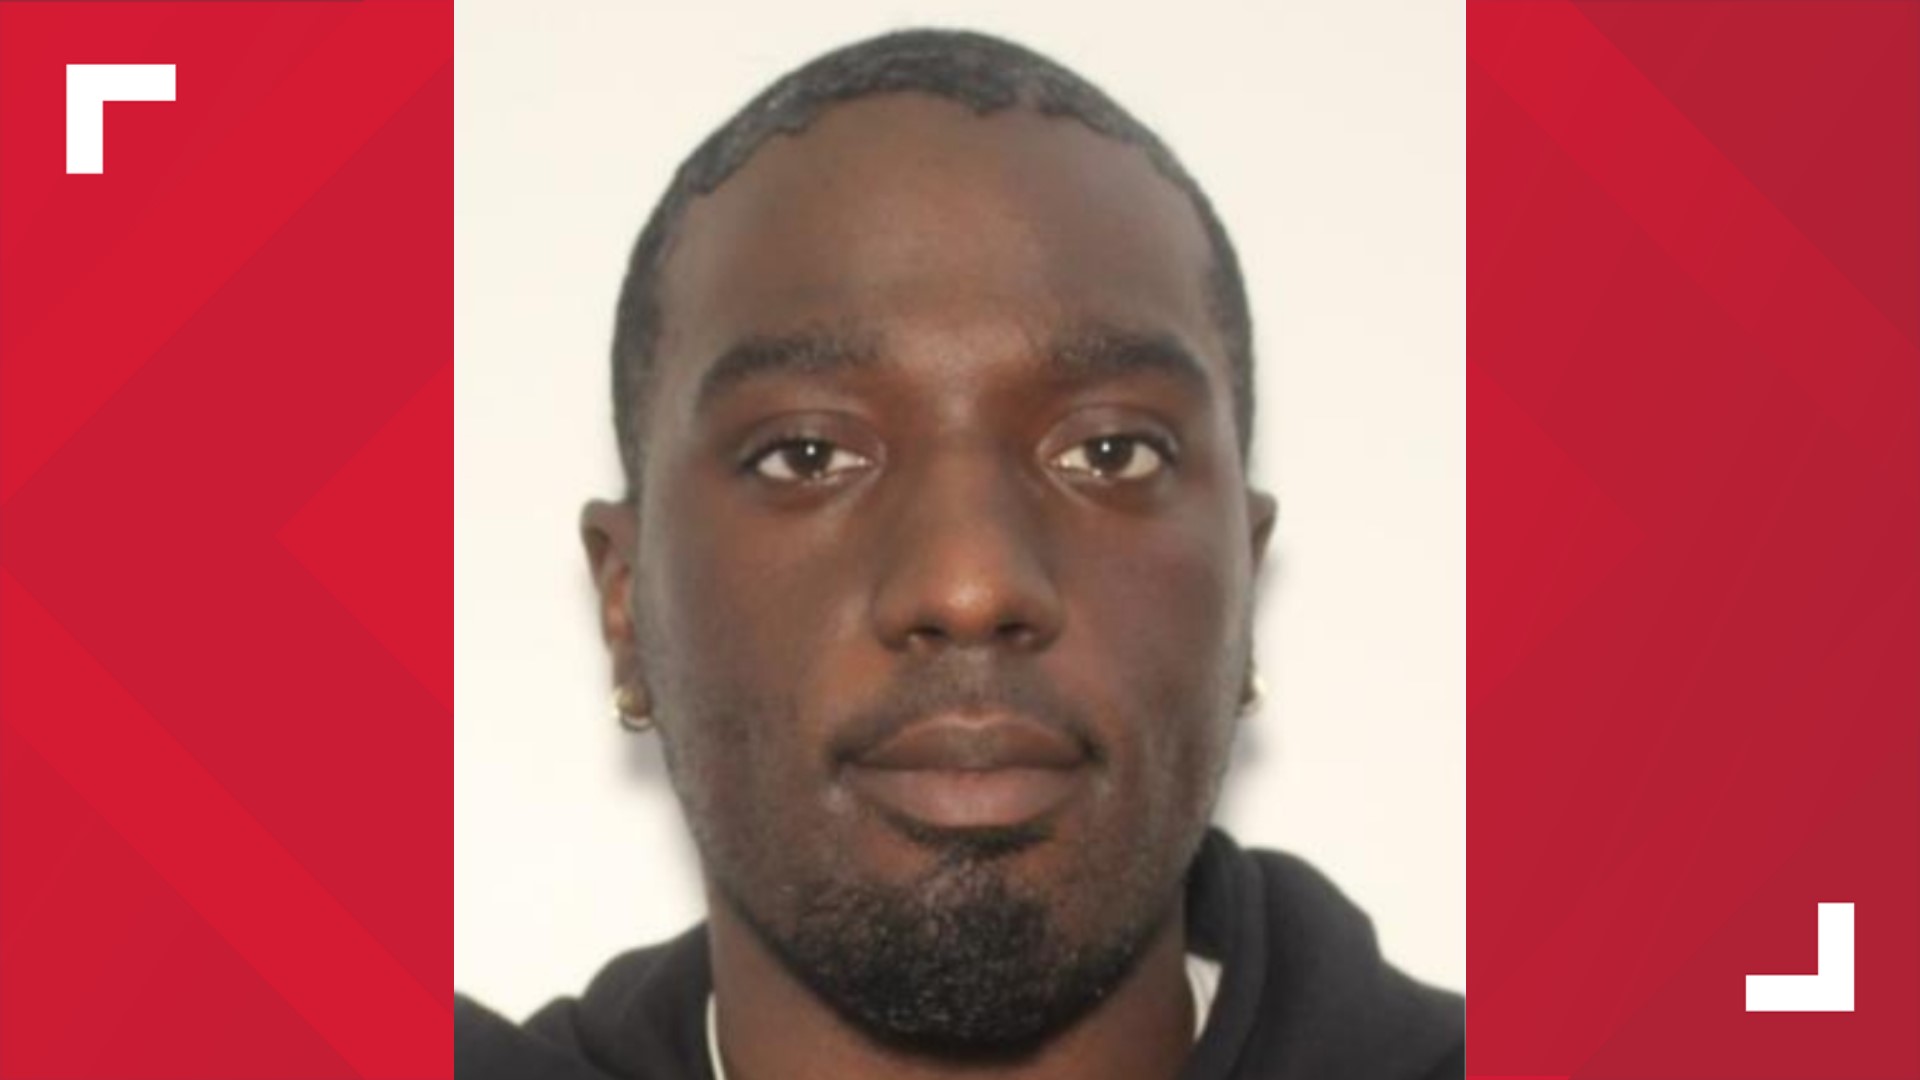 Akeem Alleyne, 30, is wanted on charges of kidnapping, rape, aggravated child molestation and aggravated child molestation by sodomy, according to authorities.